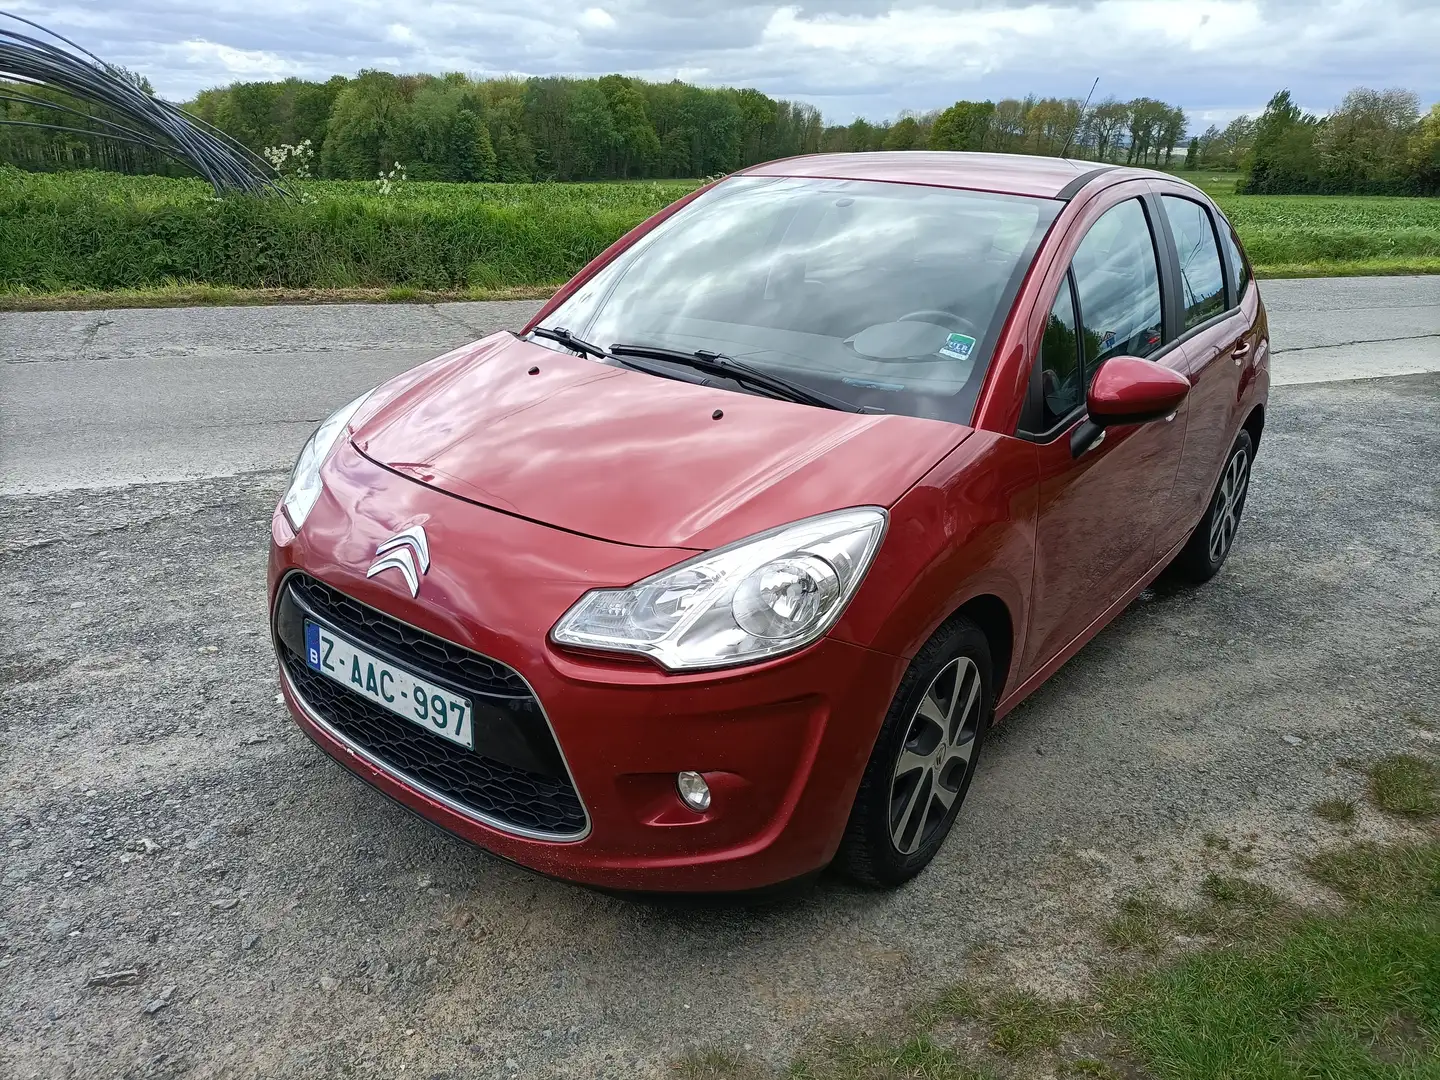 Citroen C3 1.4 HDi Collection 167957 km Rood - 1